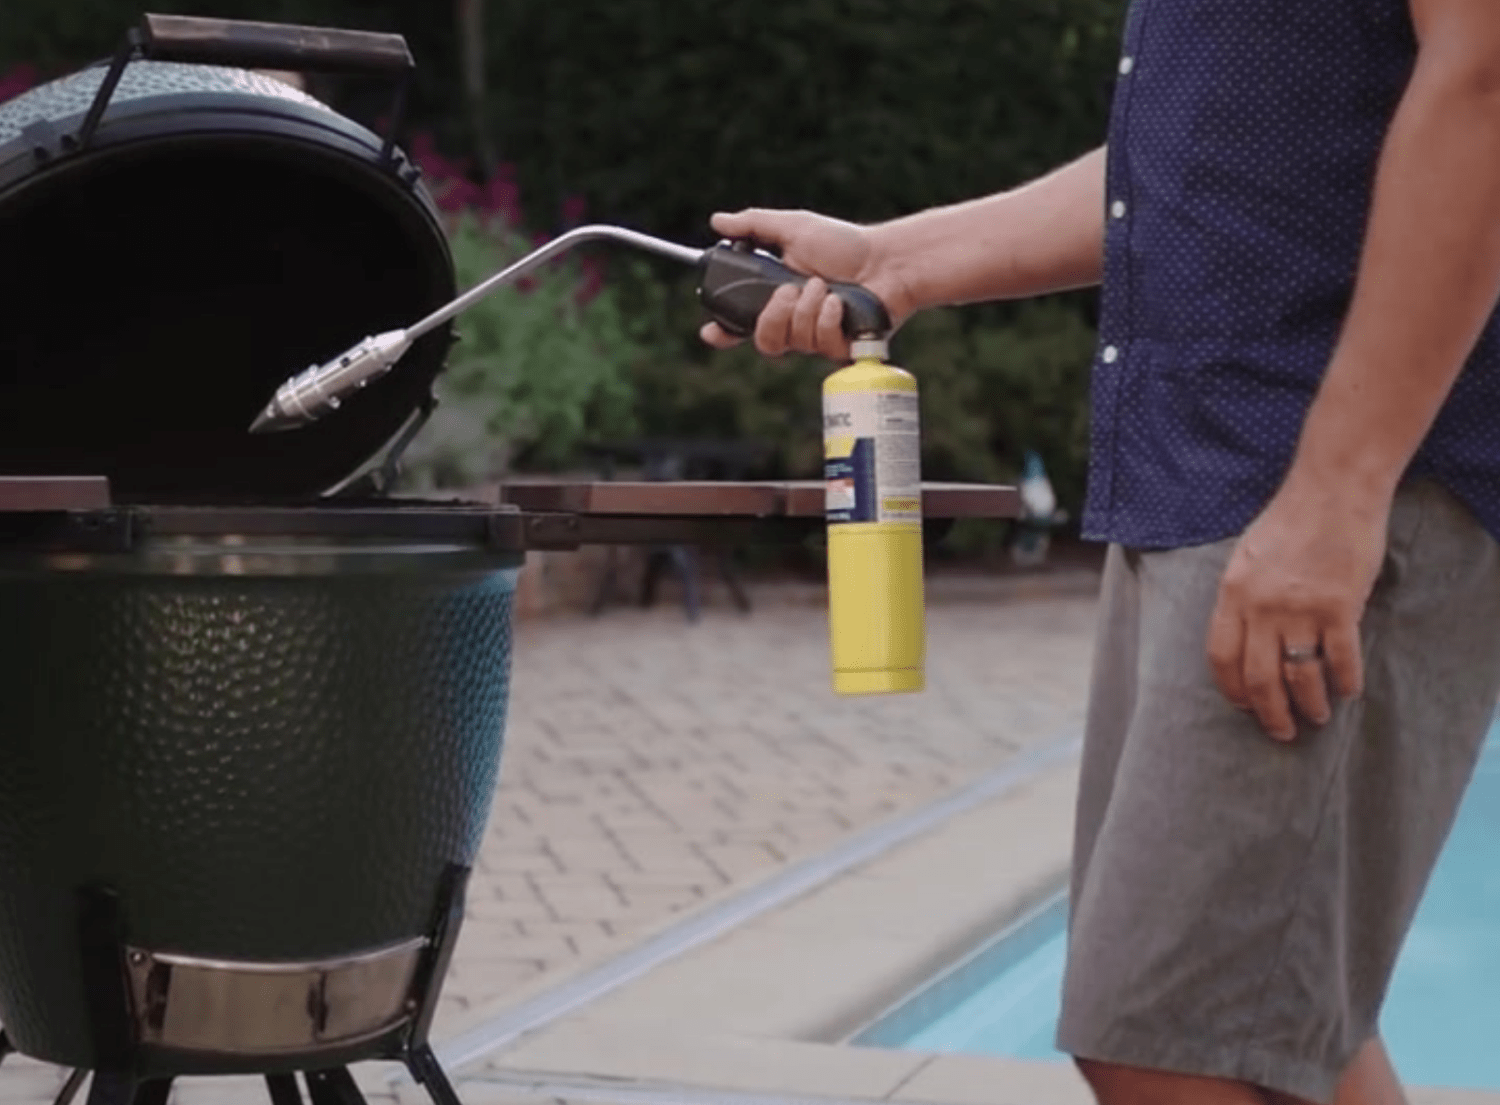 Cooking with a Kamado Grill - Guy with torch lighting kamado